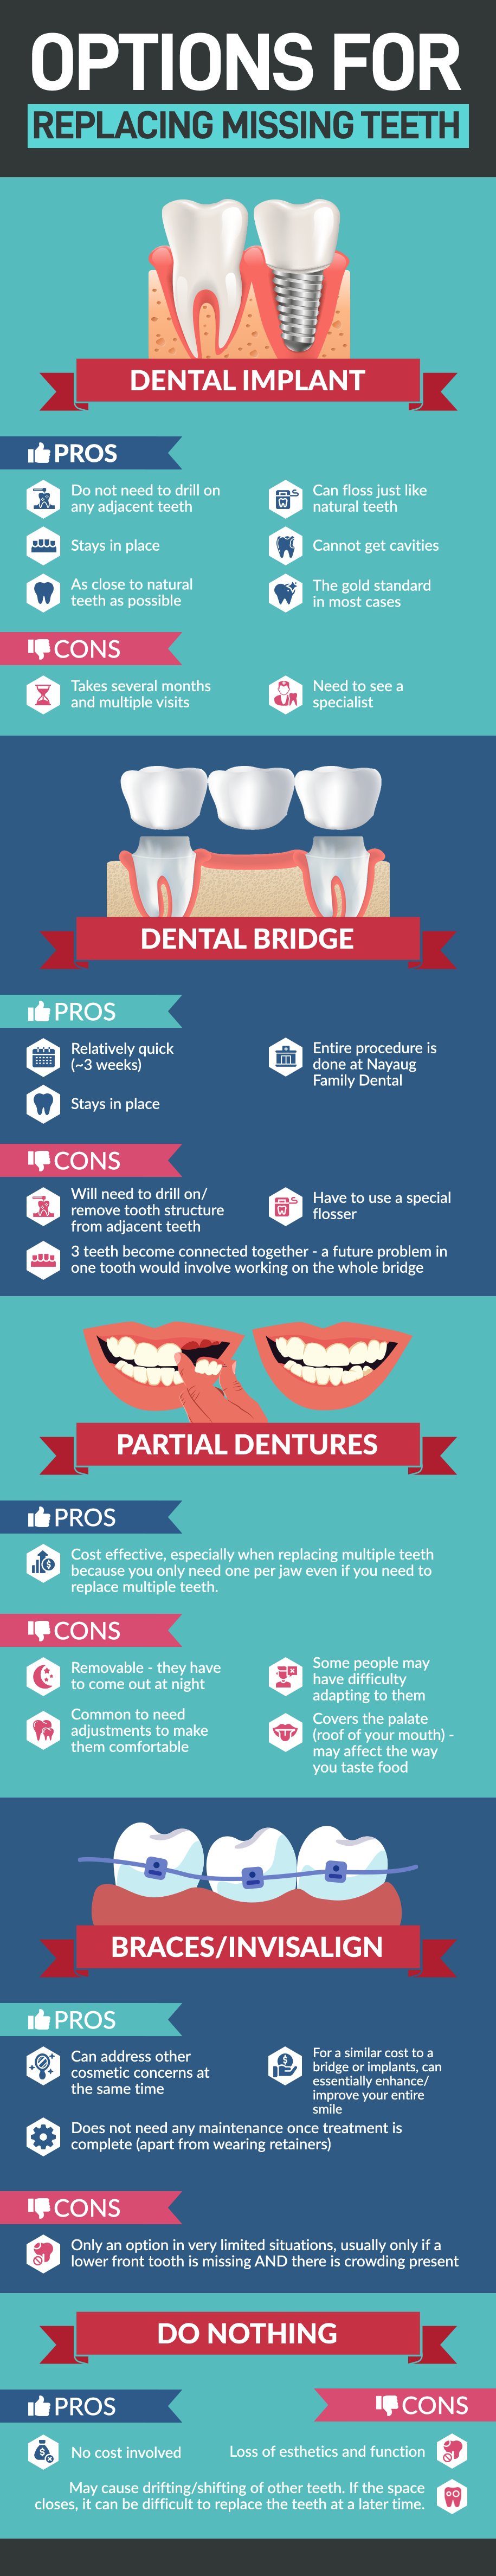 options-for-missing-teeth-infographic-1